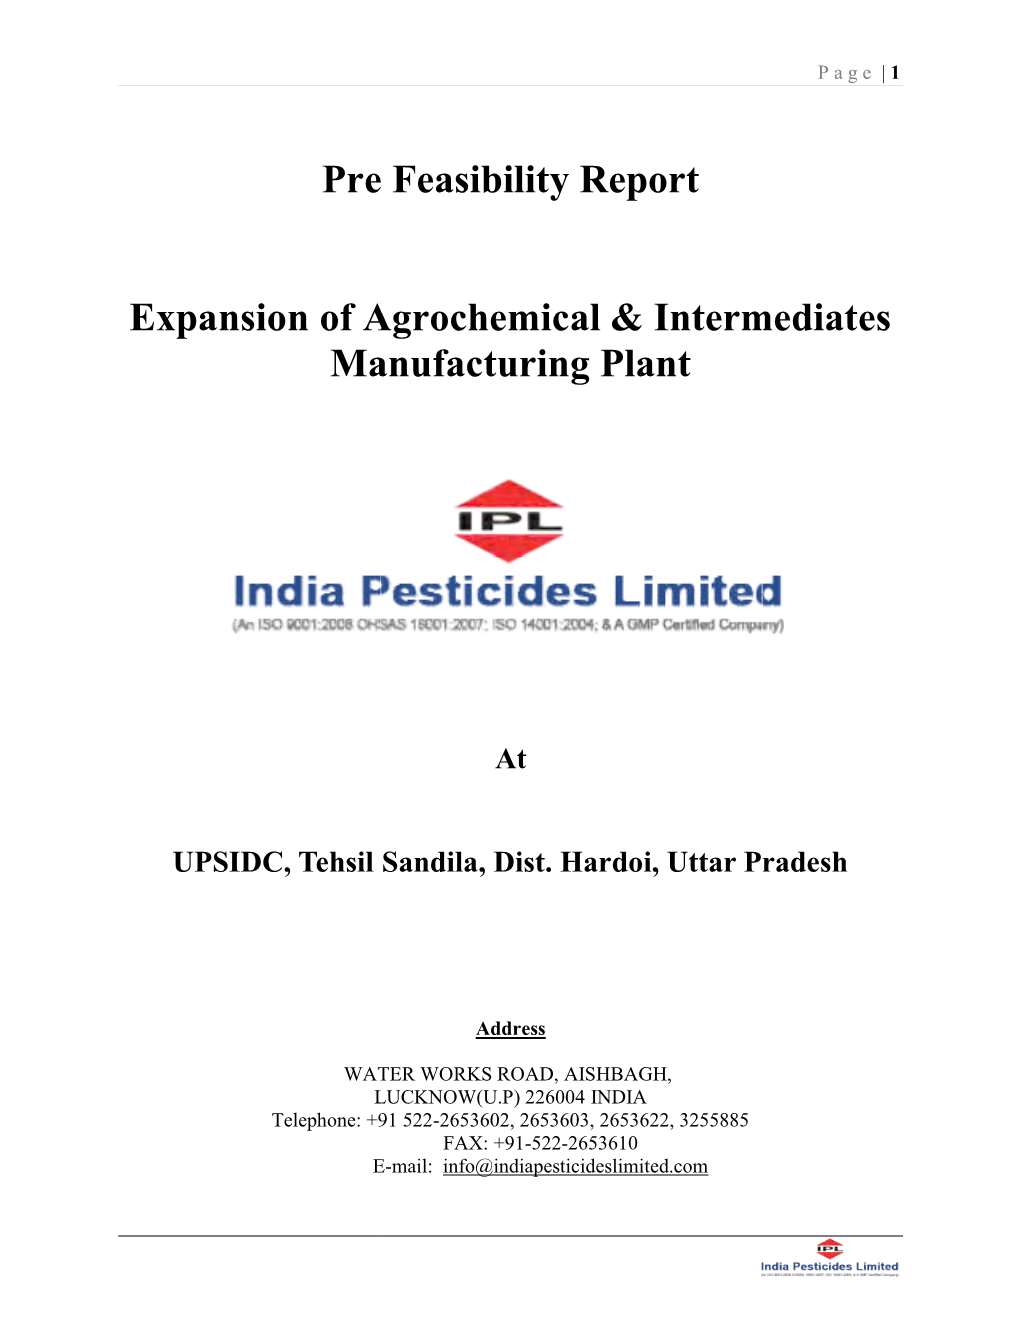 Pre Feasibility R Expansion of Agrochemica Manufacturing